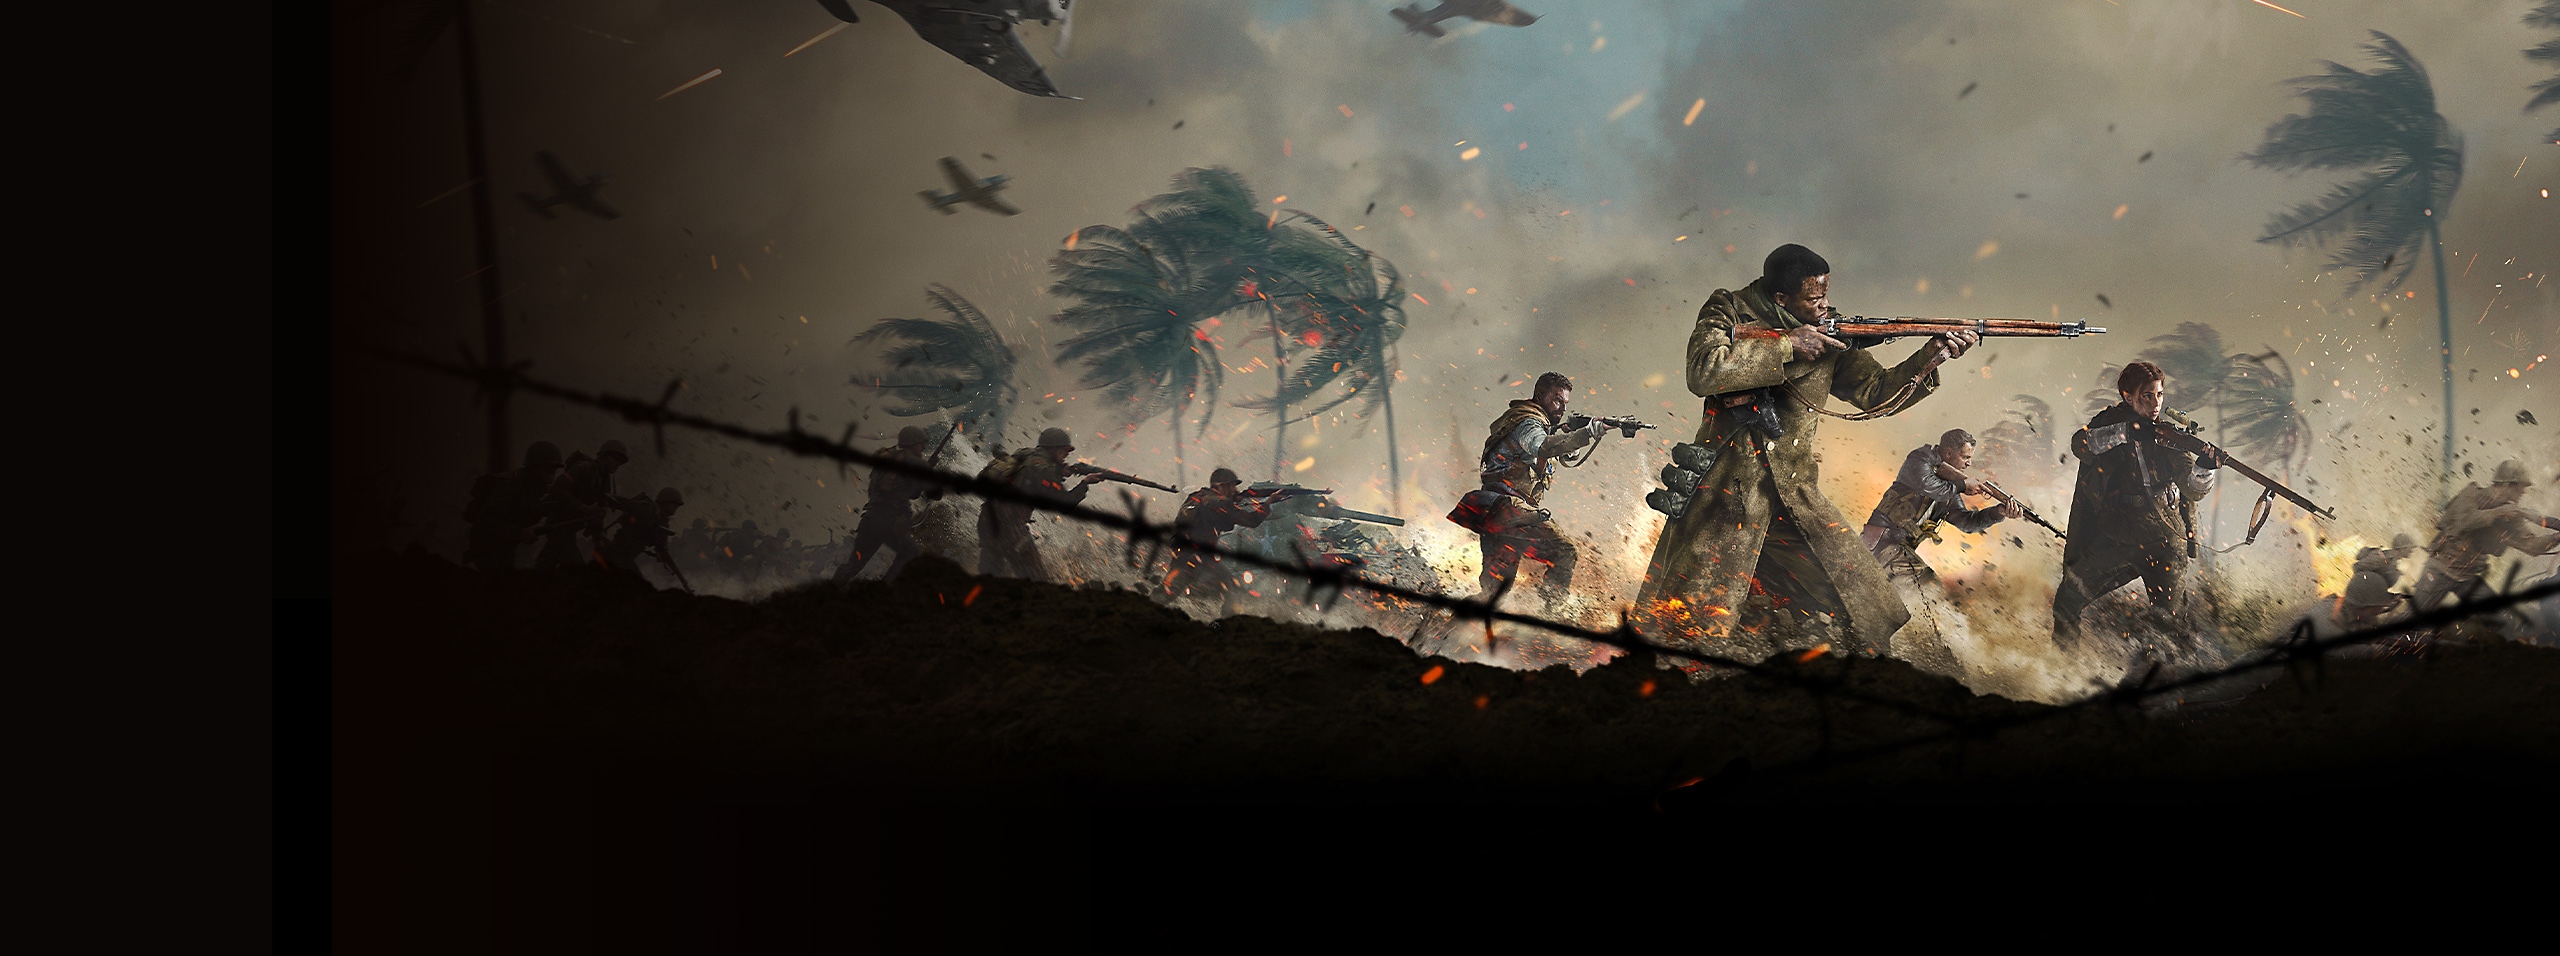 Key art for Call of Duty Vanguard, featuring several soldiers moving across an active battlefield.